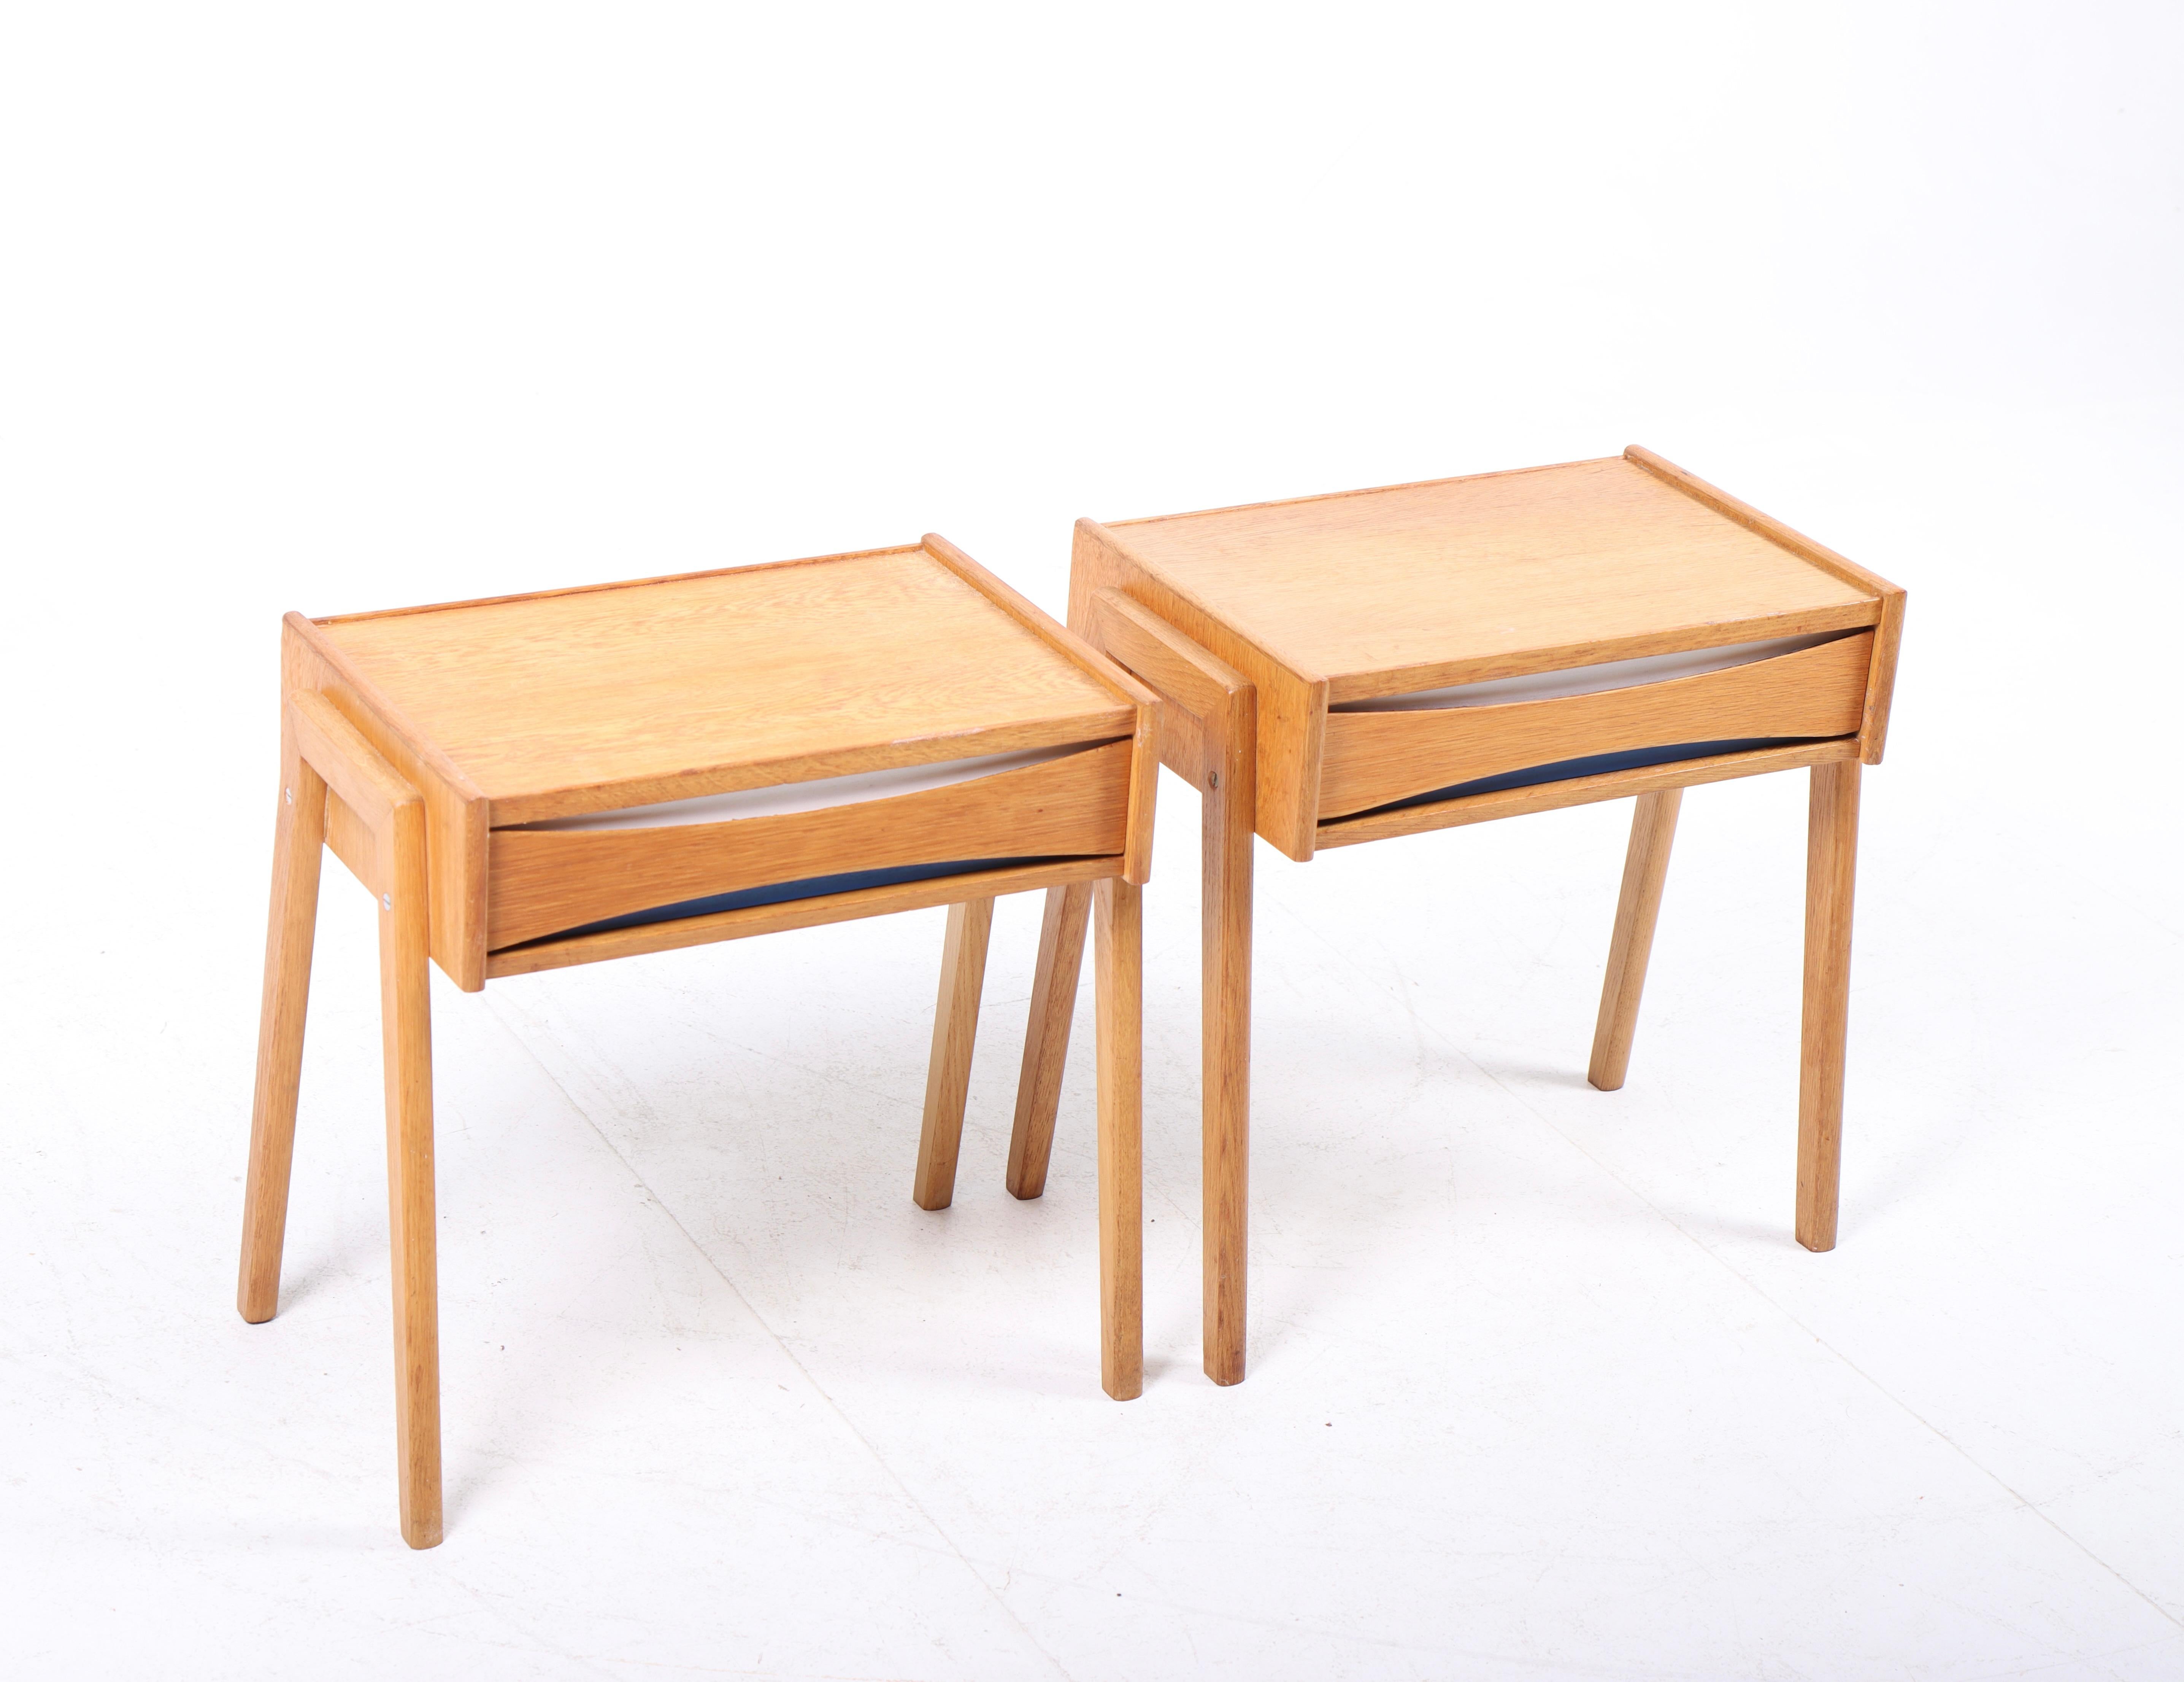 Pair of nightstands in oak designed and made in Denmark 1960s.